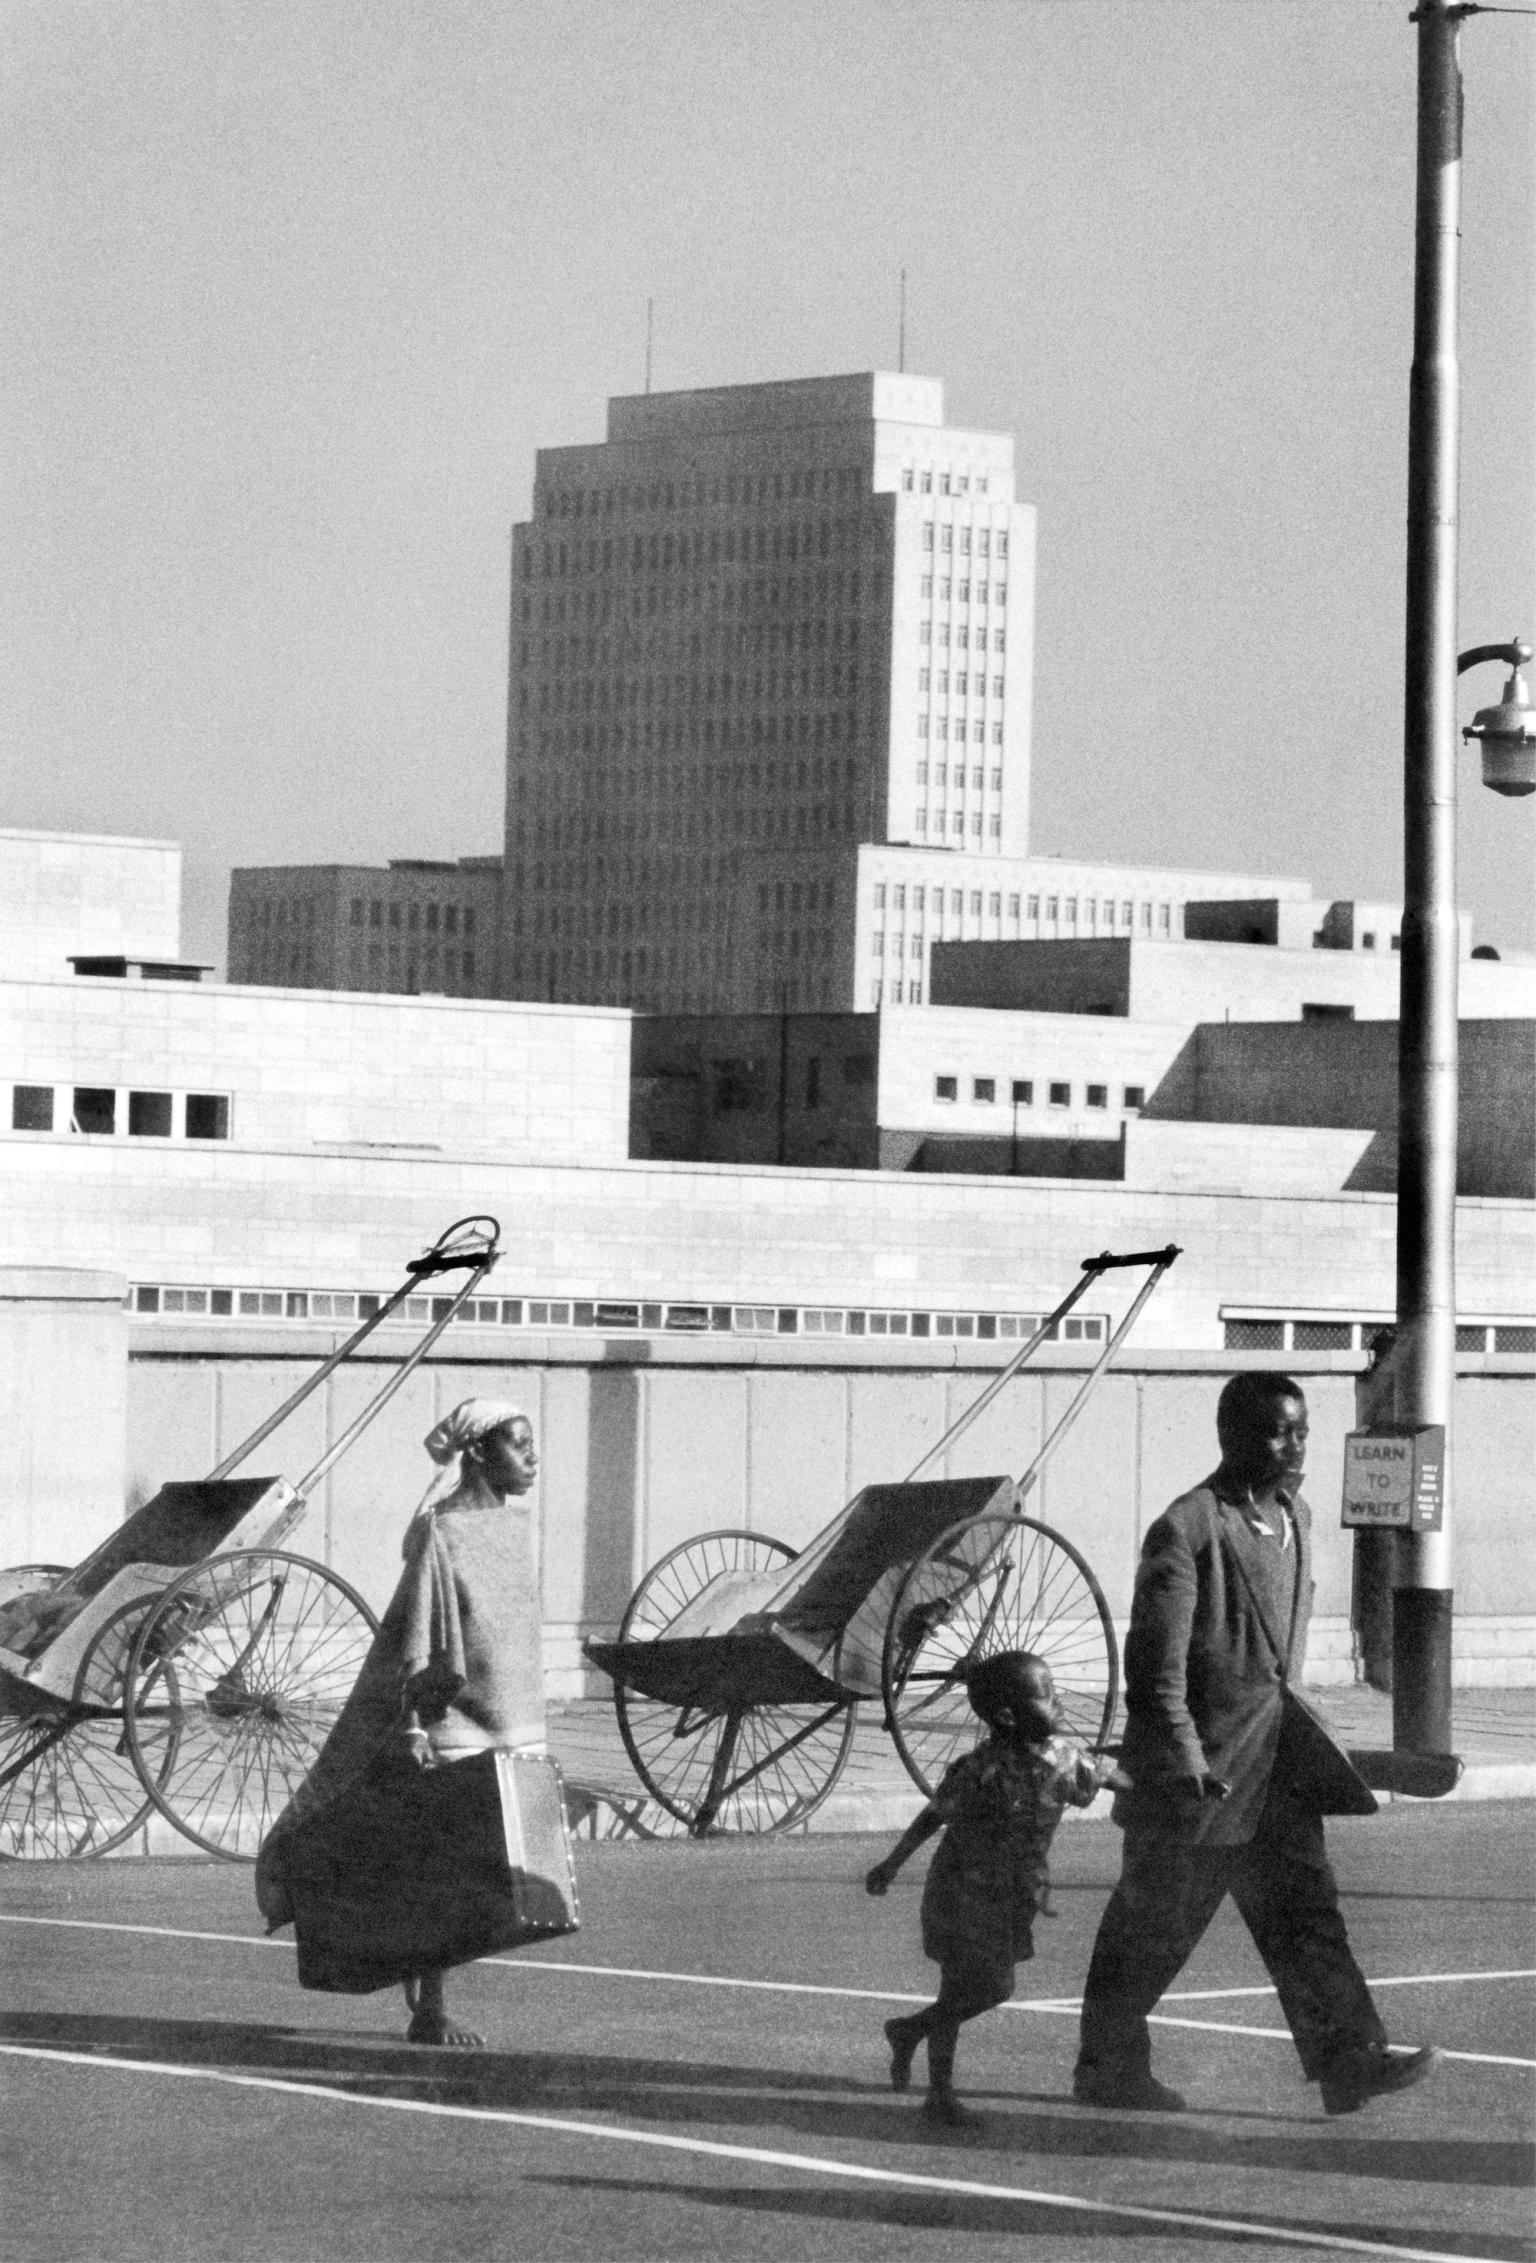 Photograph of man, woman, and child walking down city street with high-rise building and two rickshaws in background.